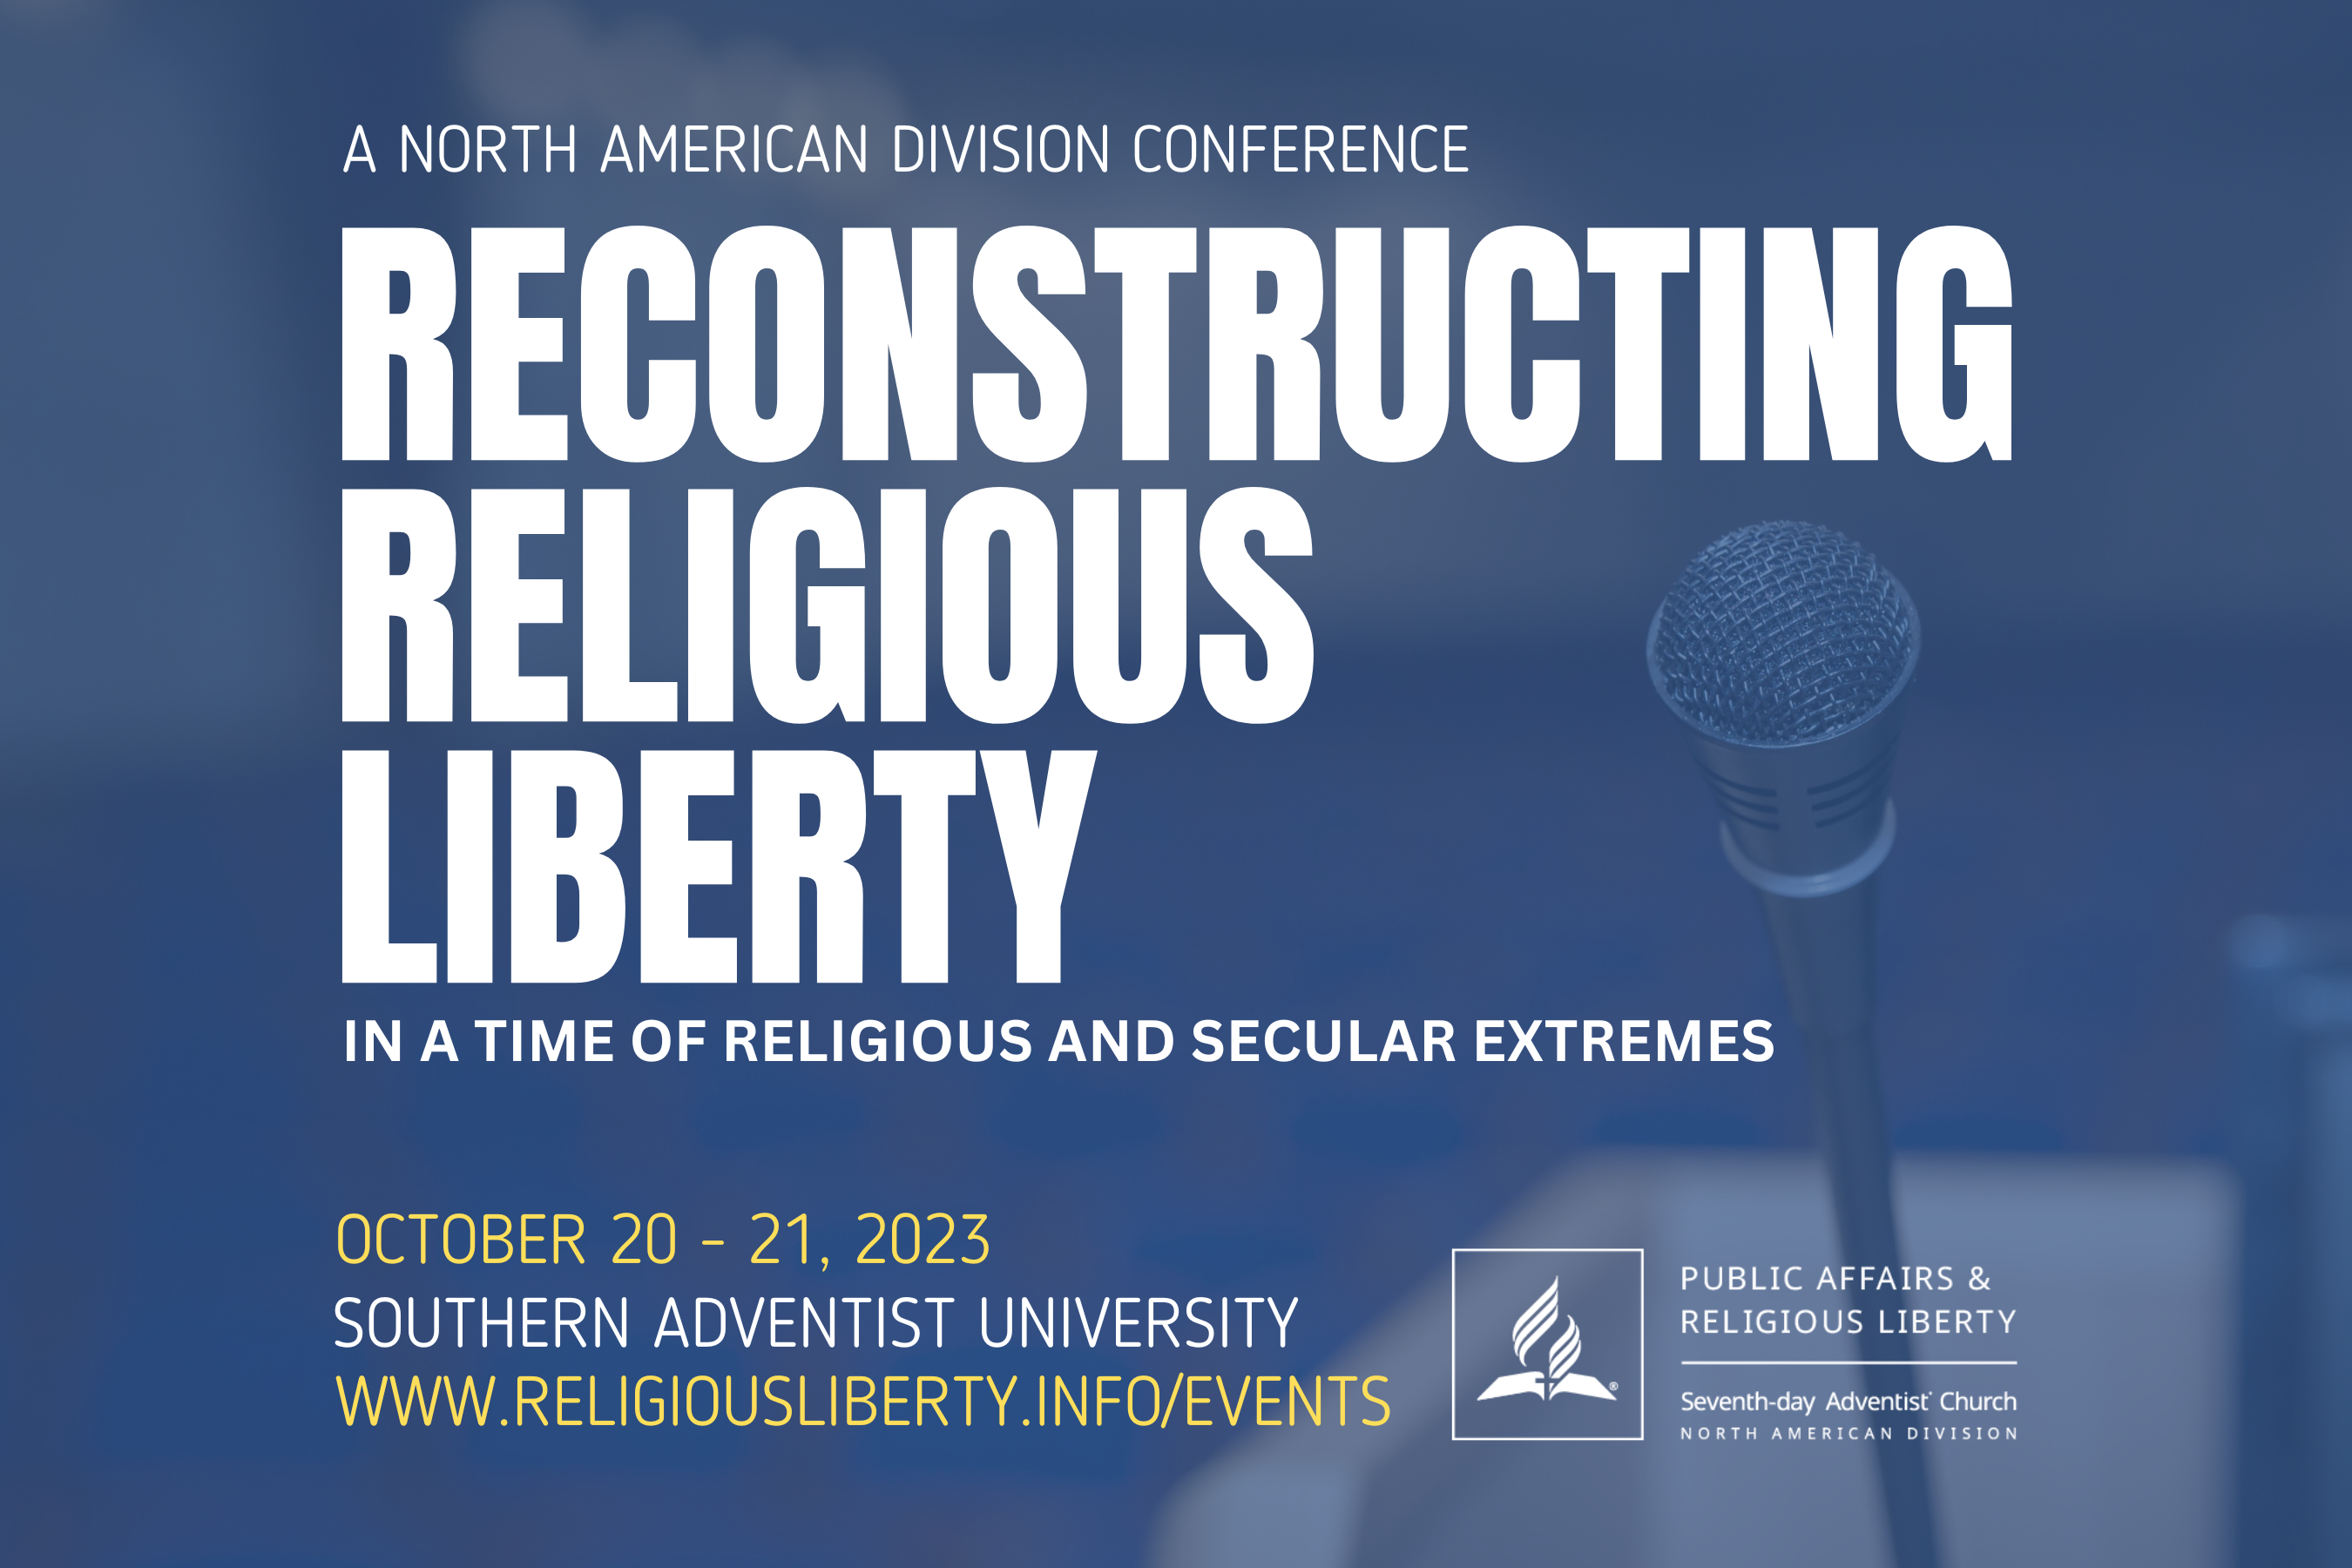 Reconstructing Religious Liberty in a Time of Religious and Secular Extremes